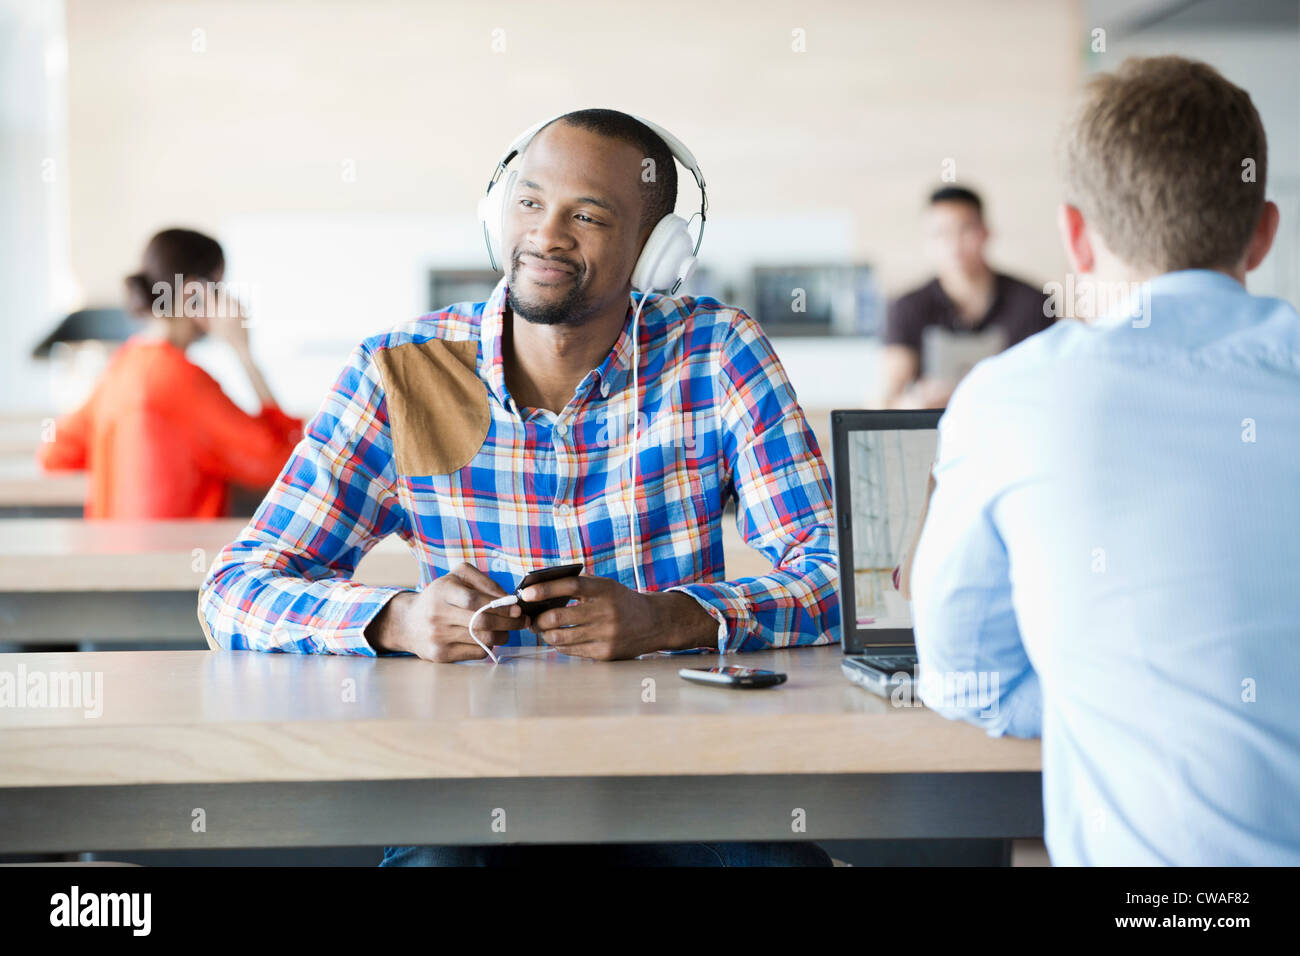 Young man in break room listening to music Stock Photo